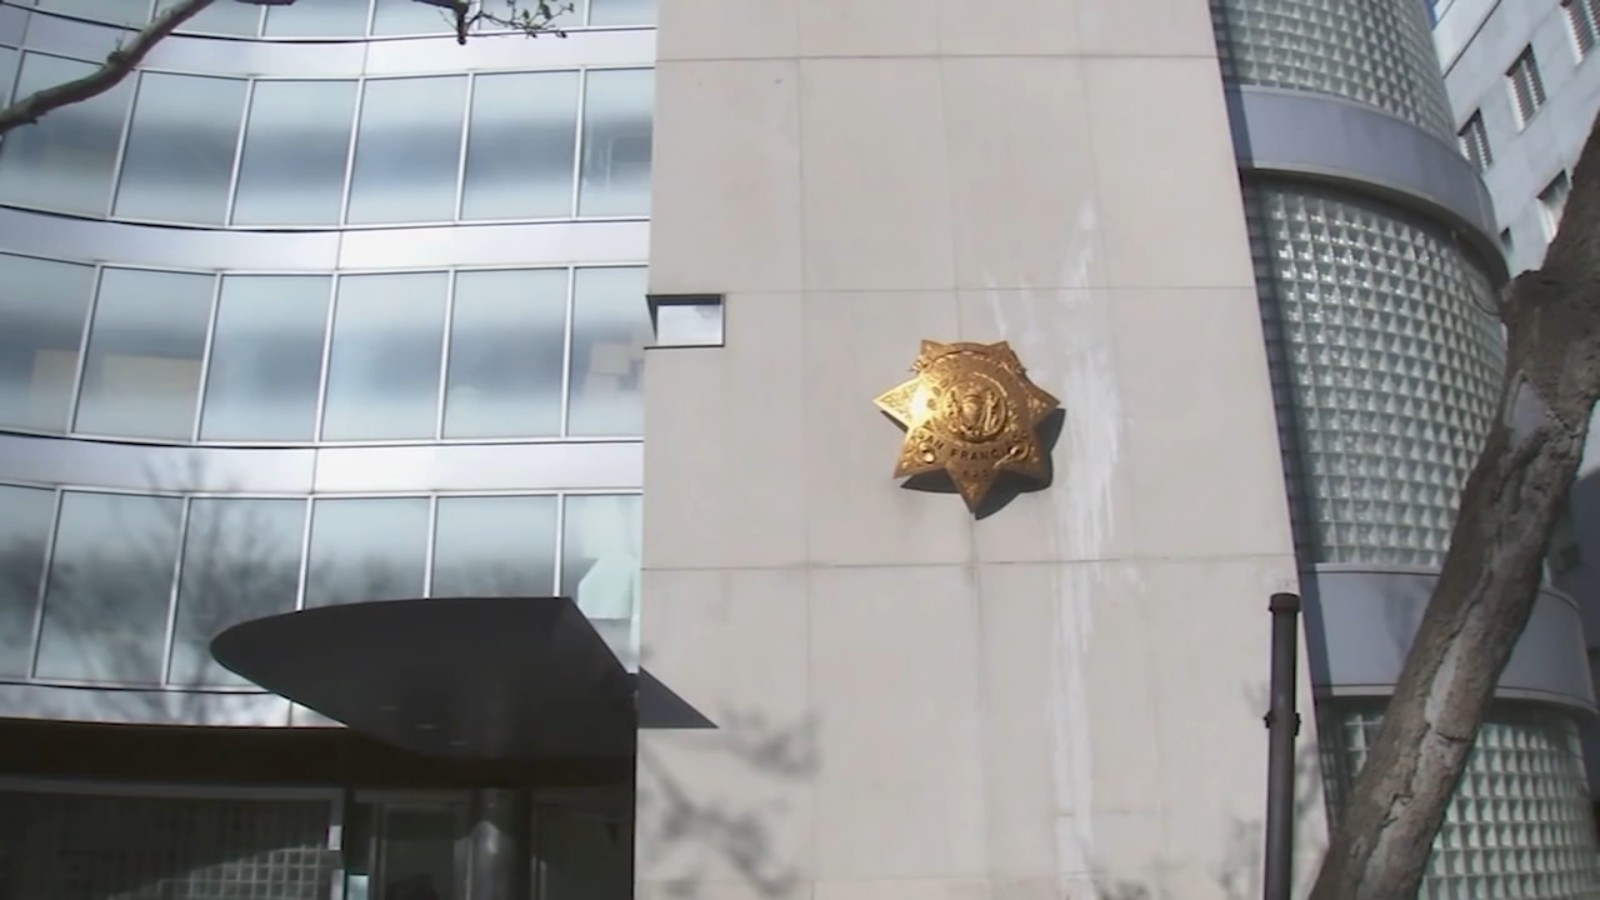 SF sheriff addresses need for more deputies, not department cuts